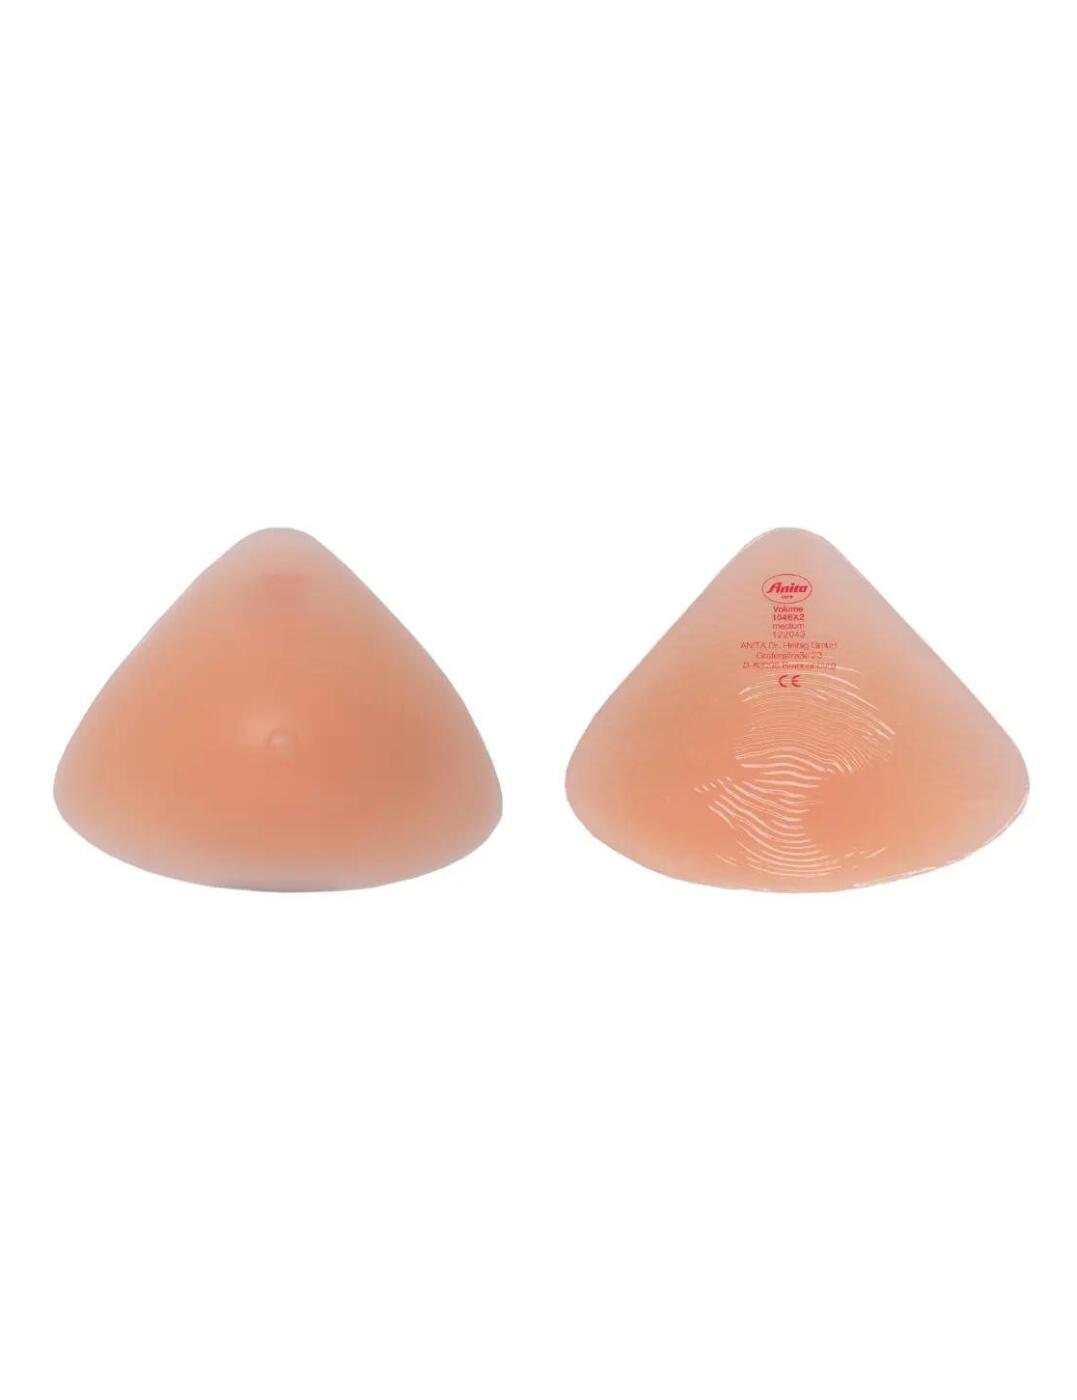 Anita Volume Partial Breast Forms Sand